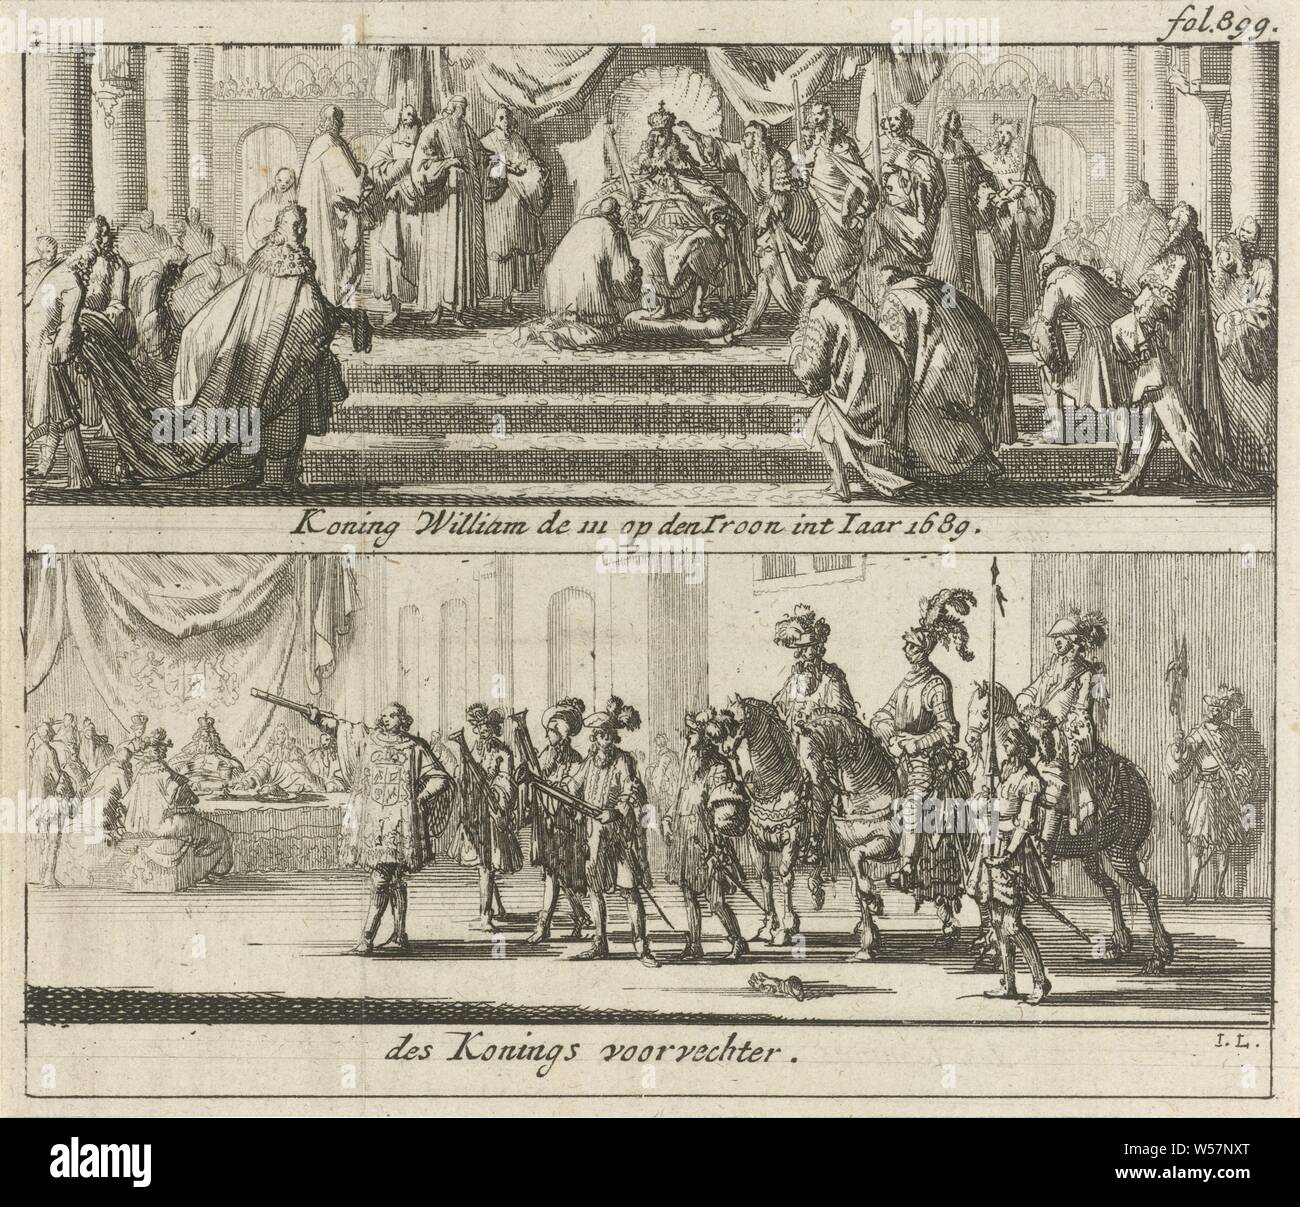 Willem III on the throne and the ceremony with the royal camp fighter, 1689 King William the III on the Throne int Year 1689 / the King's champion (title on object), Sheet with two performances. Above King William III on the English throne, 1689. Below the ceremony in which the royal camp fighter on horseback, accompanied by two other horsemen, challenges anyone who challenges the legality of the new king's choice, 21 April 1689. Top right hand mark: fol. 899, after the coronation, London, Willem III (Prince of Orange and King of England, Scotland and Ireland), Jan Luyken (mentioned on object Stock Photo